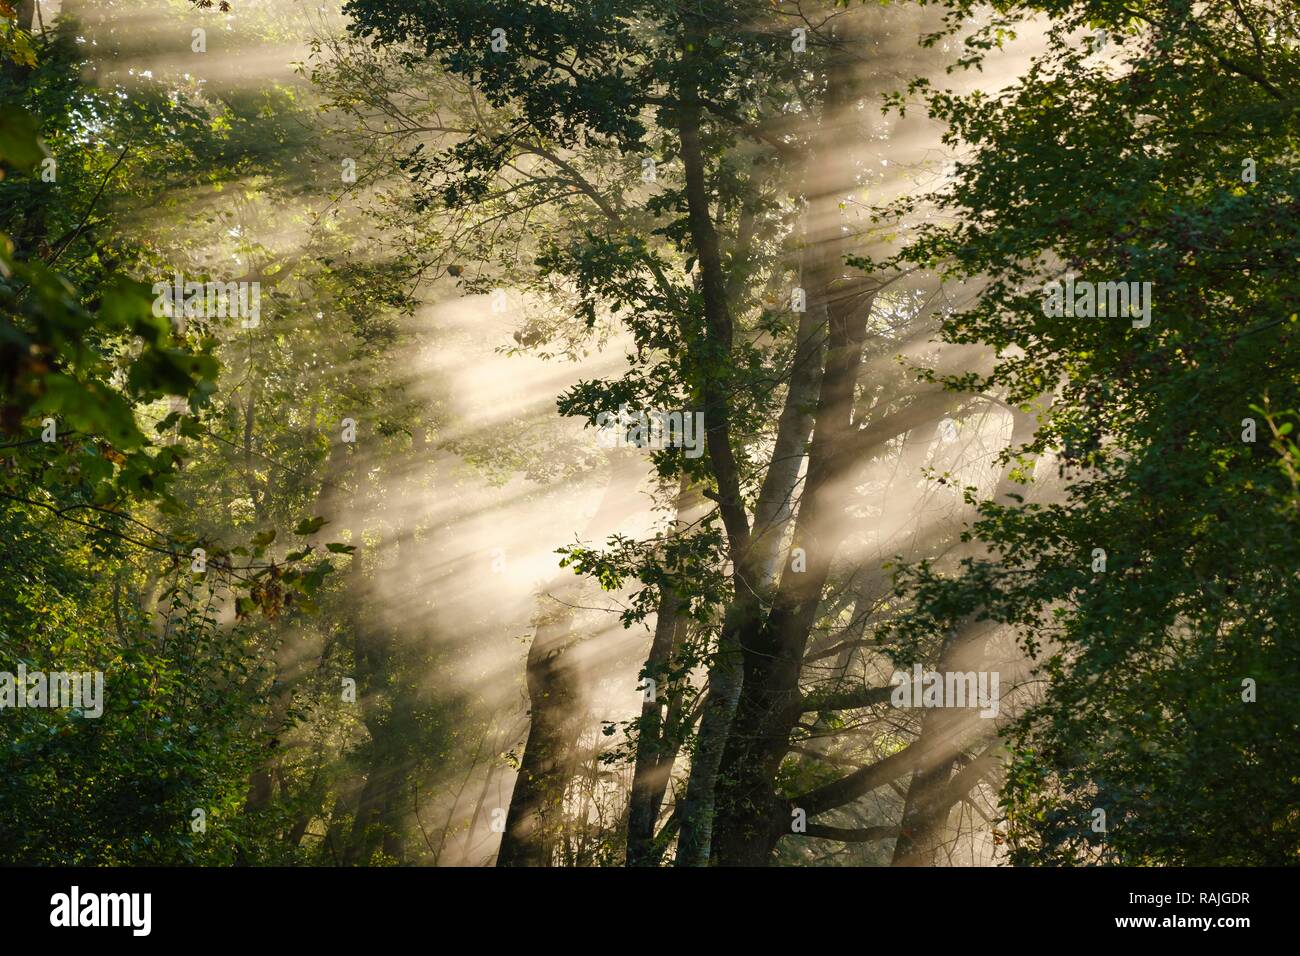 Fog with lateral sunrays in the forest, nature reserve Isarauen near Niederhummel, Upper Bavaria, Bavaria, Germany Stock Photo